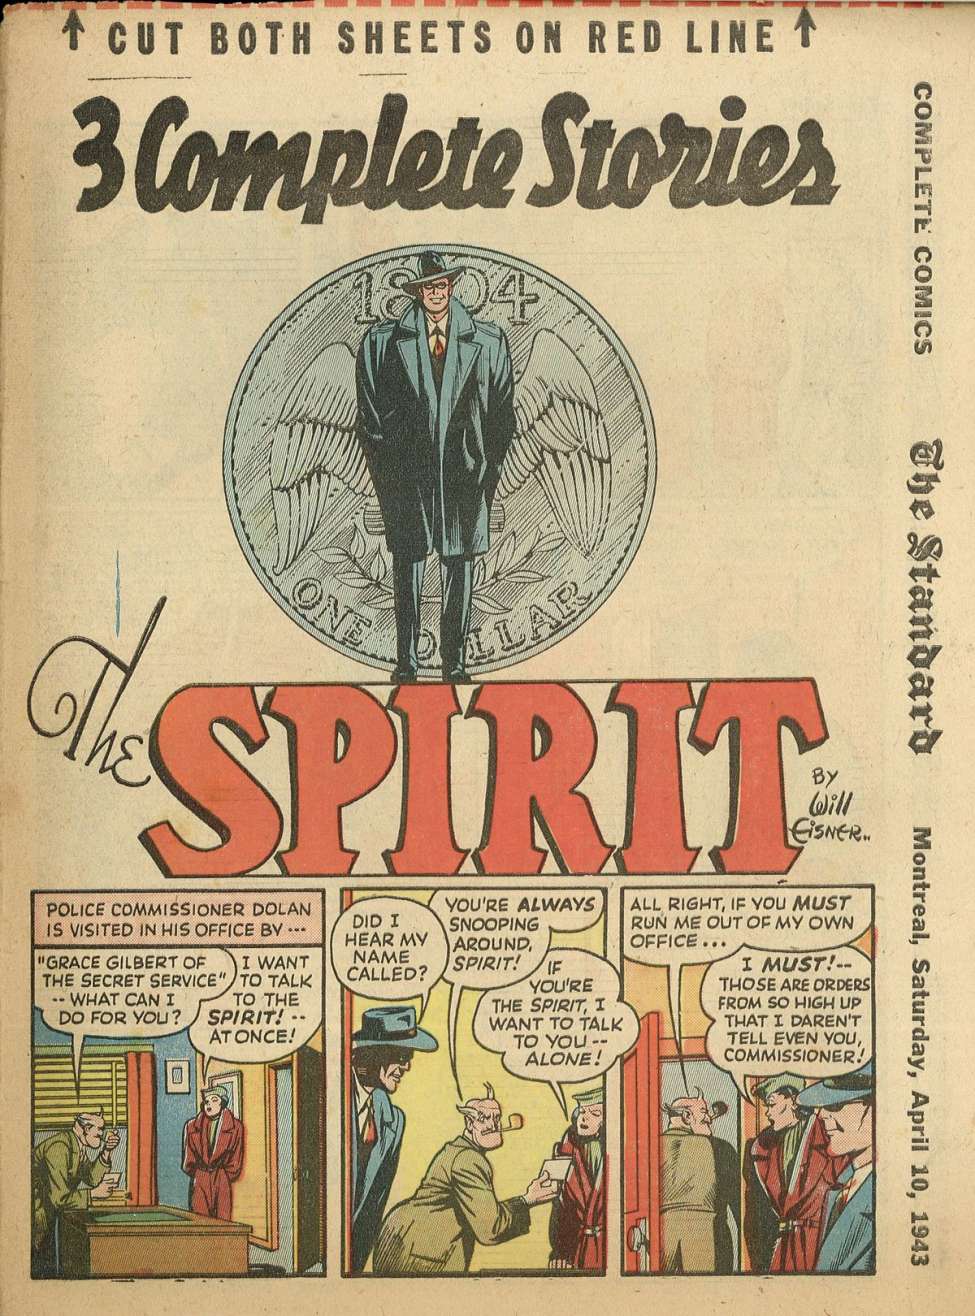 Book Cover For The Spirit (1943-04-10) - Montreal Standard